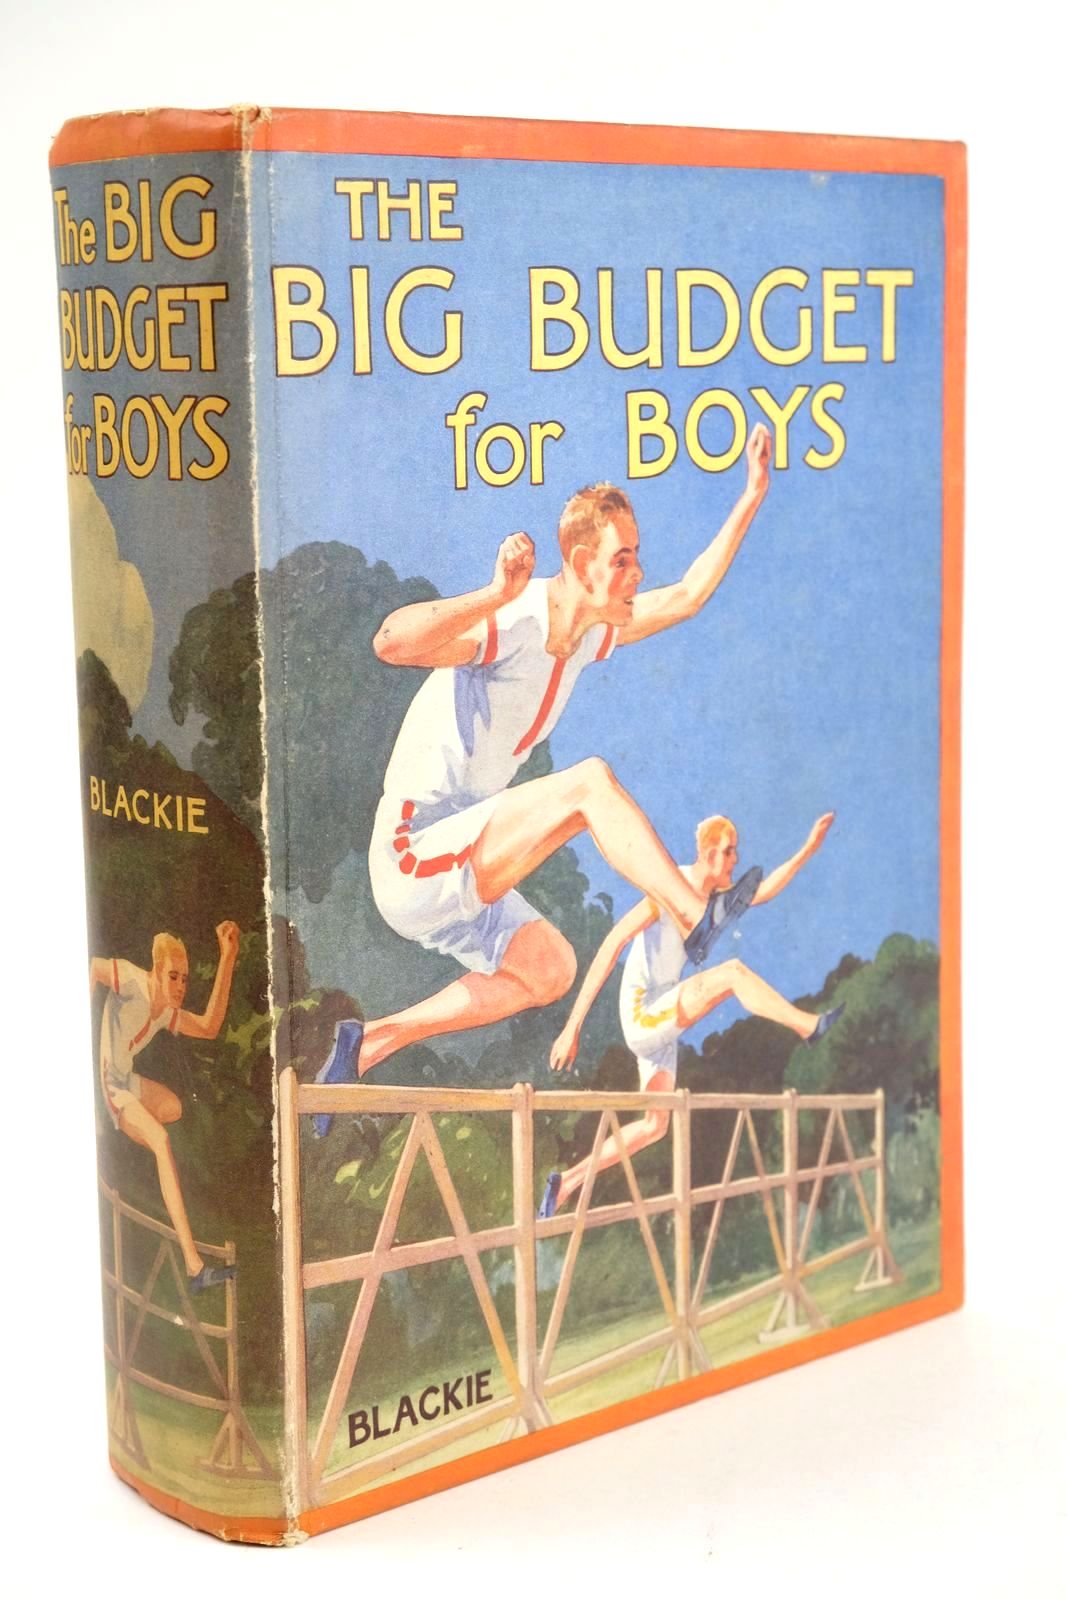 Photo of THE BIG BUDGET FOR BOYS written by Rutley, C. Bernard
Markham, Harold
Lucas, S. Beresford
Cowper, E.E.
et al, illustrated by MacKinlay, M.
Lumley, Savile
et al., published by Blackie & Son Ltd. (STOCK CODE: 1325128)  for sale by Stella & Rose's Books